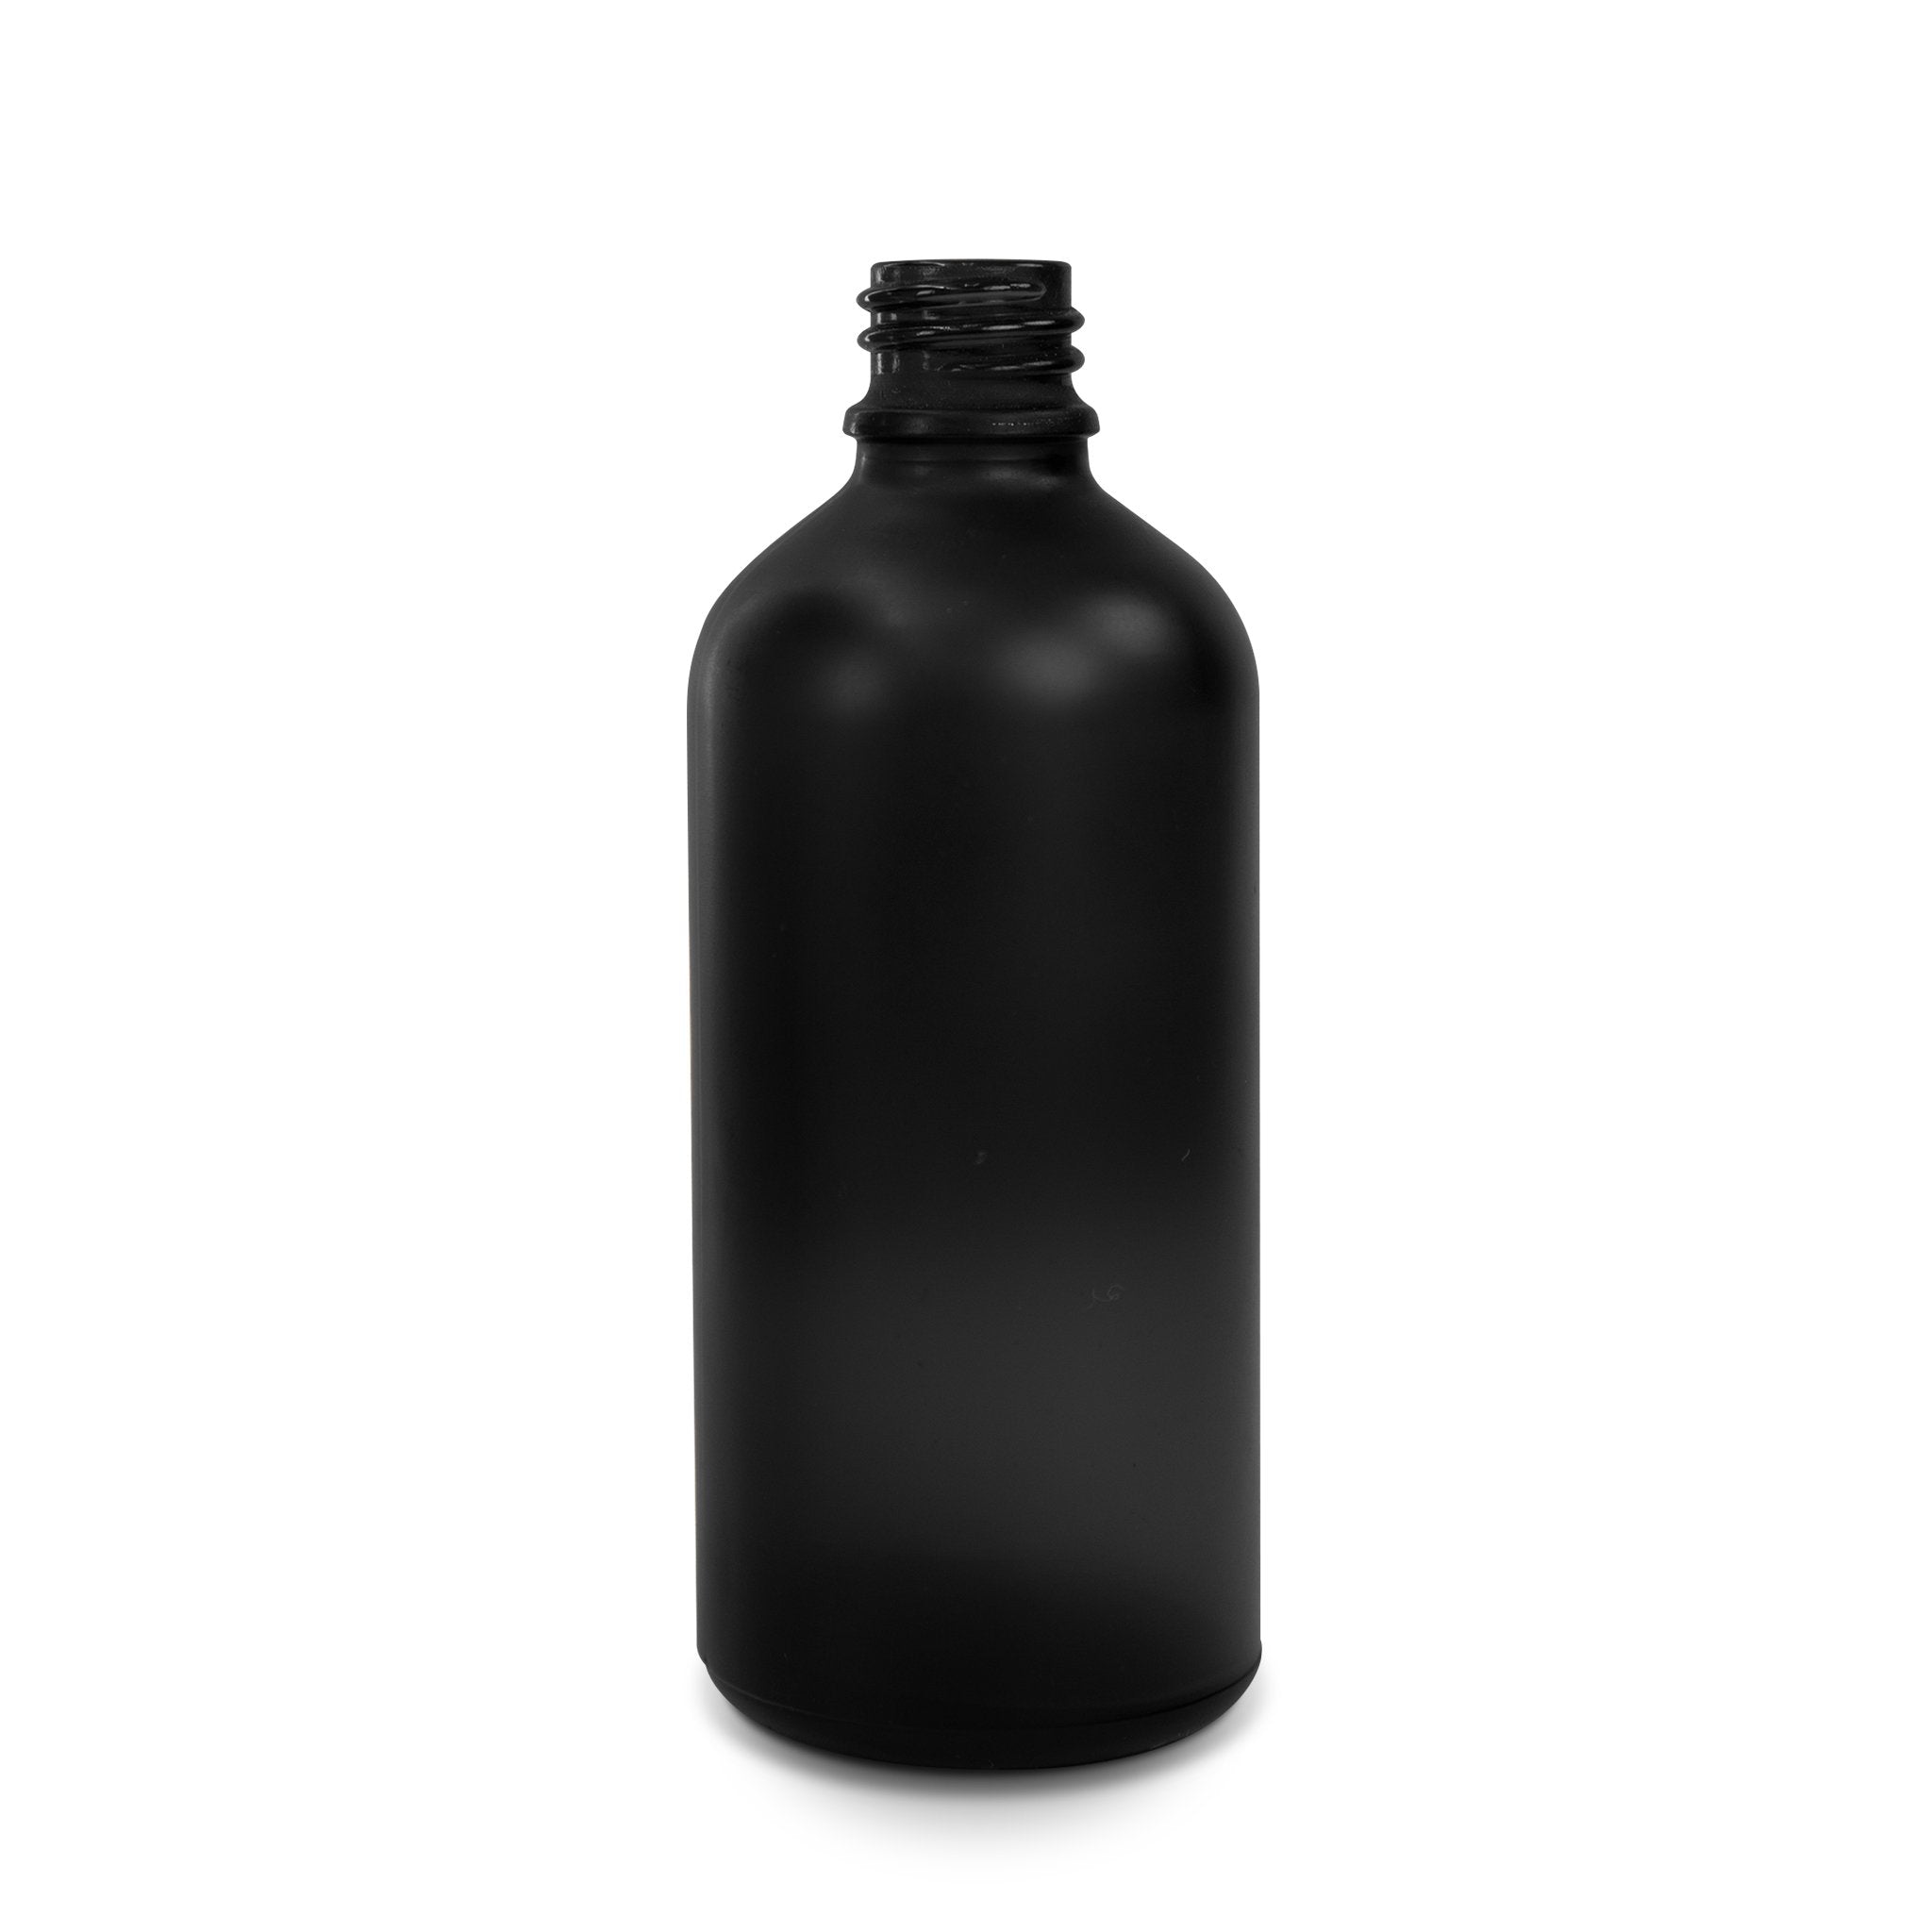 Stone Candles Supplies Bottle Room Spray and Diffuser Black Matte